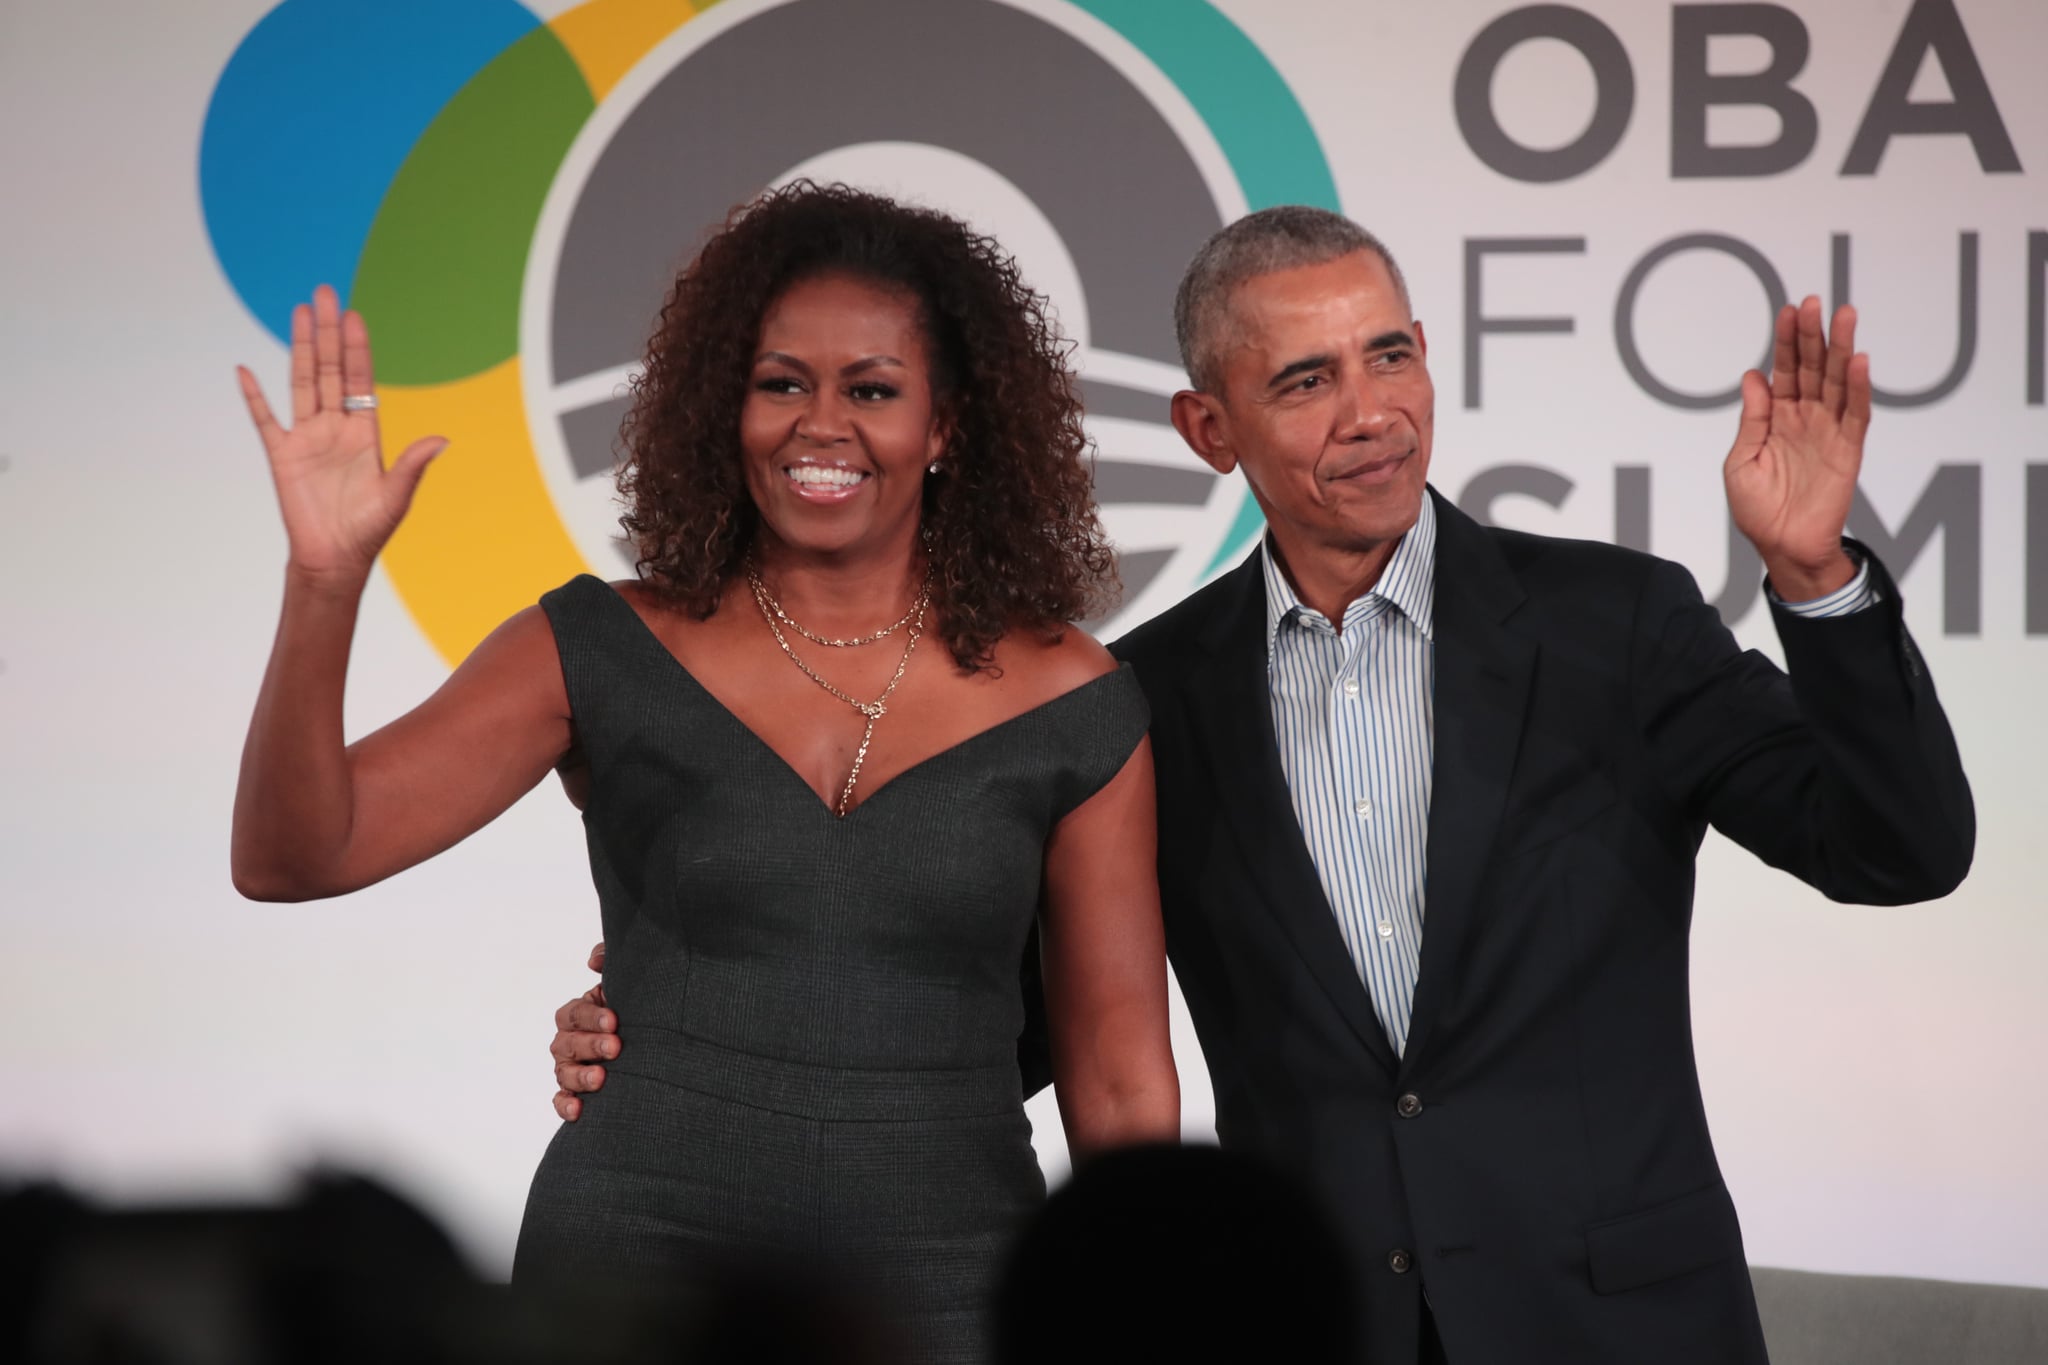 Michelle Obama’s Latest Accomplishment? Shelling Out Spot-On Dating Advice